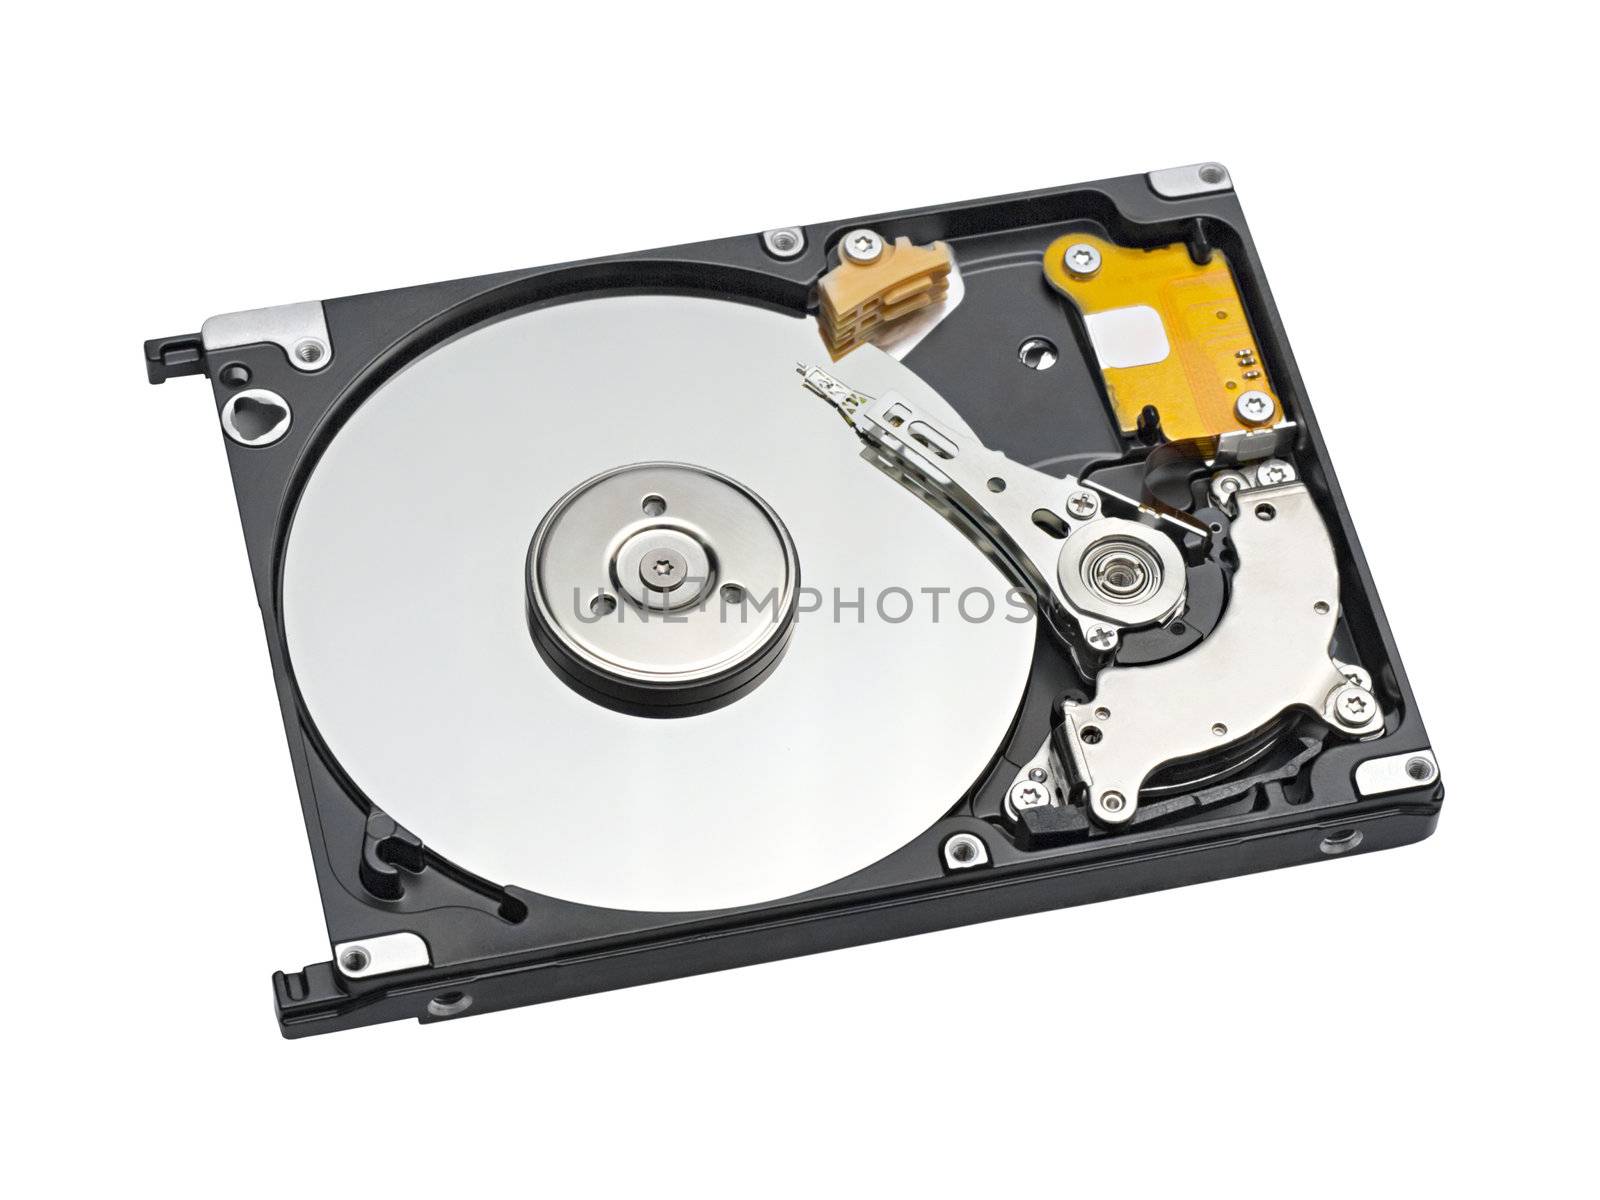 hard drive for laptop isolated on white background